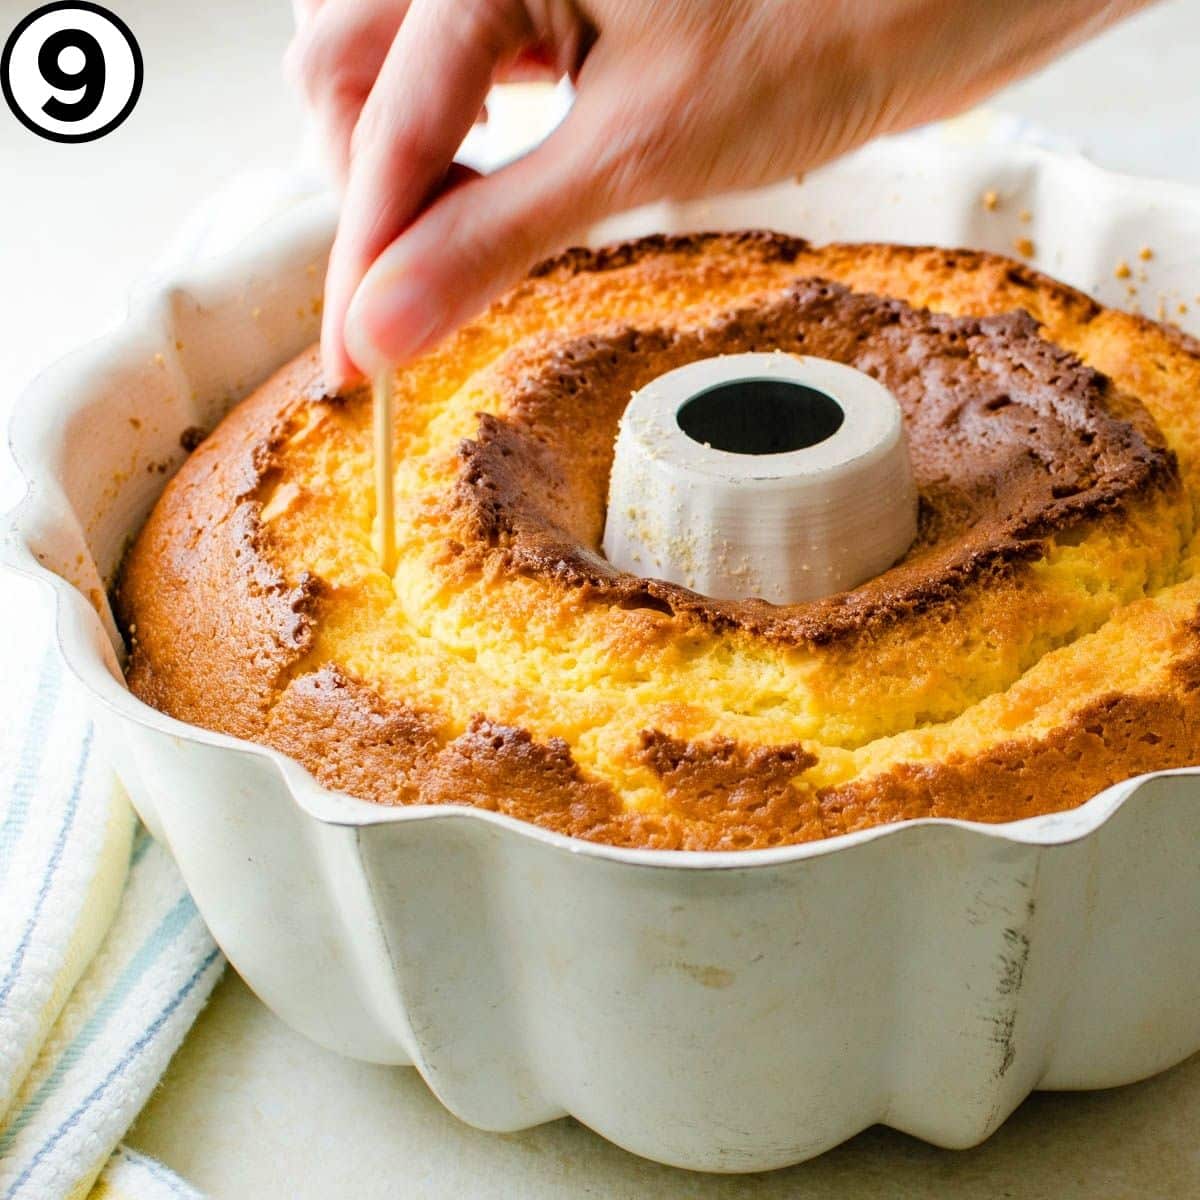 Poking holes in the baked cake. 